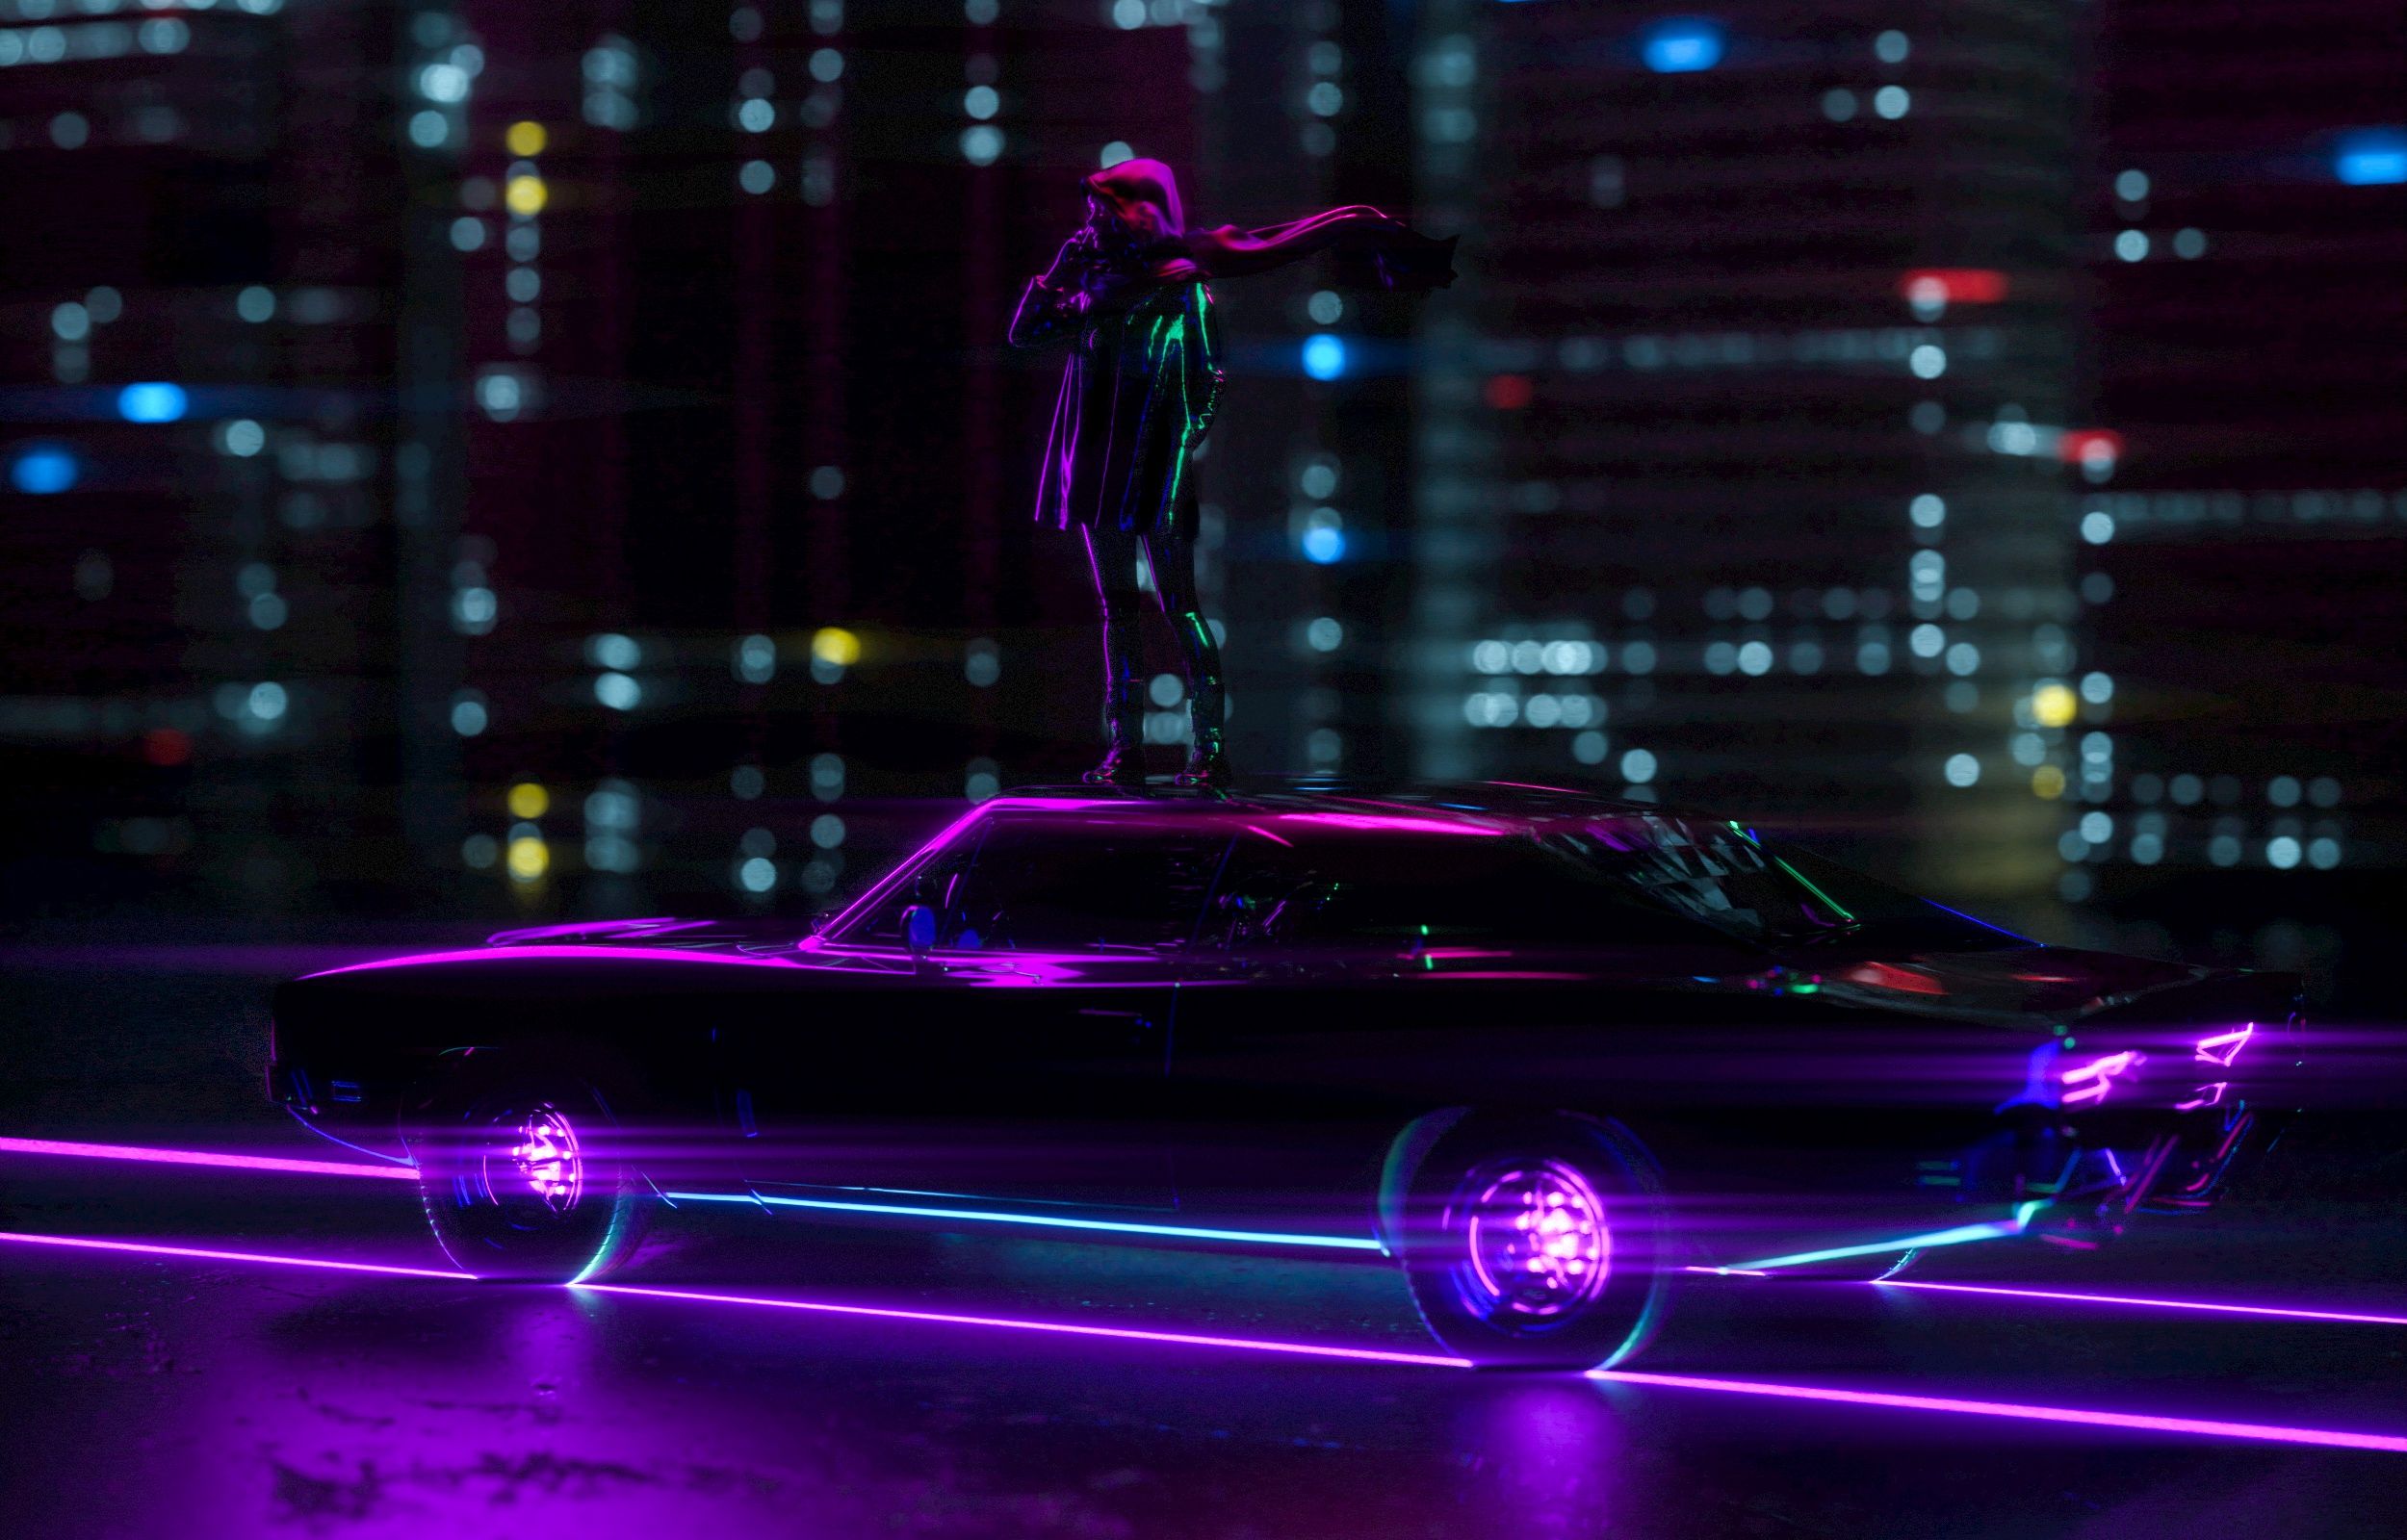 Girl Standing On Car Neon City, HD Artist, 4k Wallpaper, Image, Background, Photo and Picture